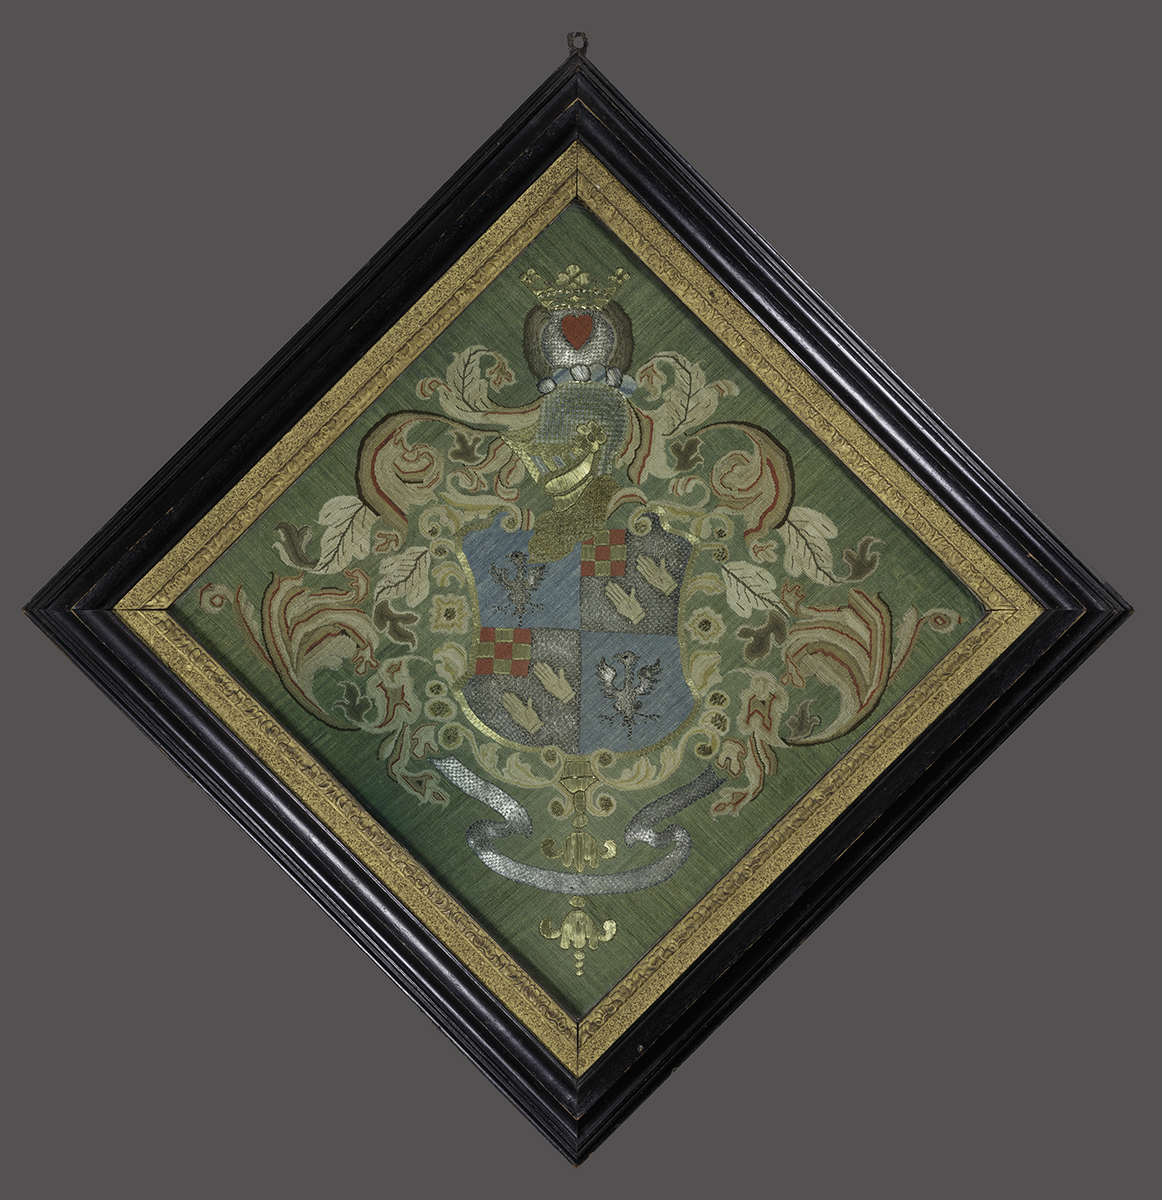 1994.0003 A, B Coat of Arms and Frame